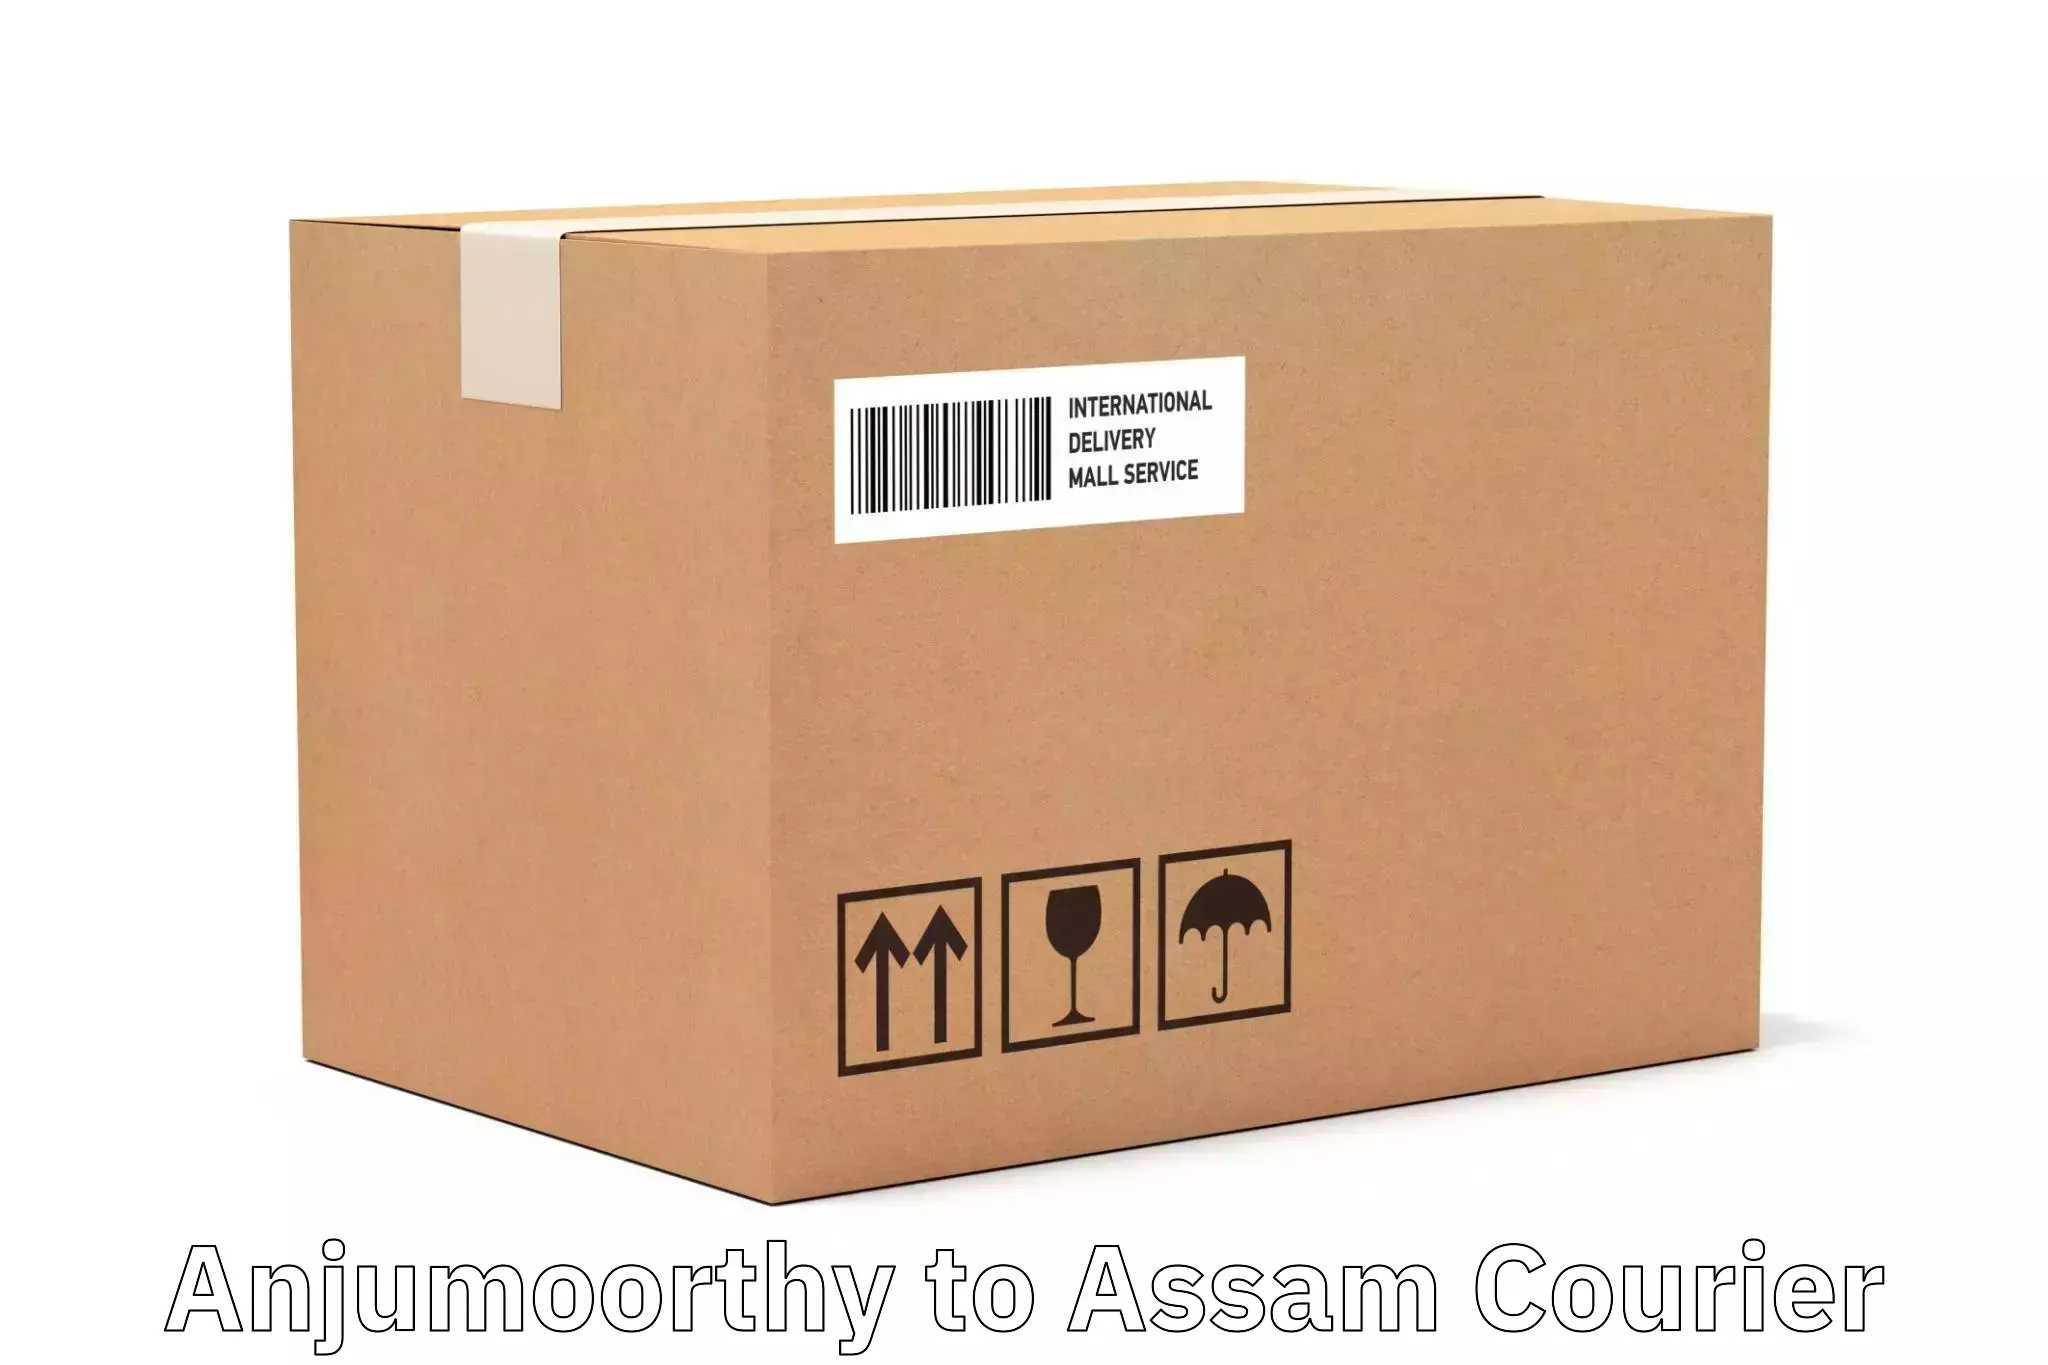 24-hour courier service Anjumoorthy to Assam